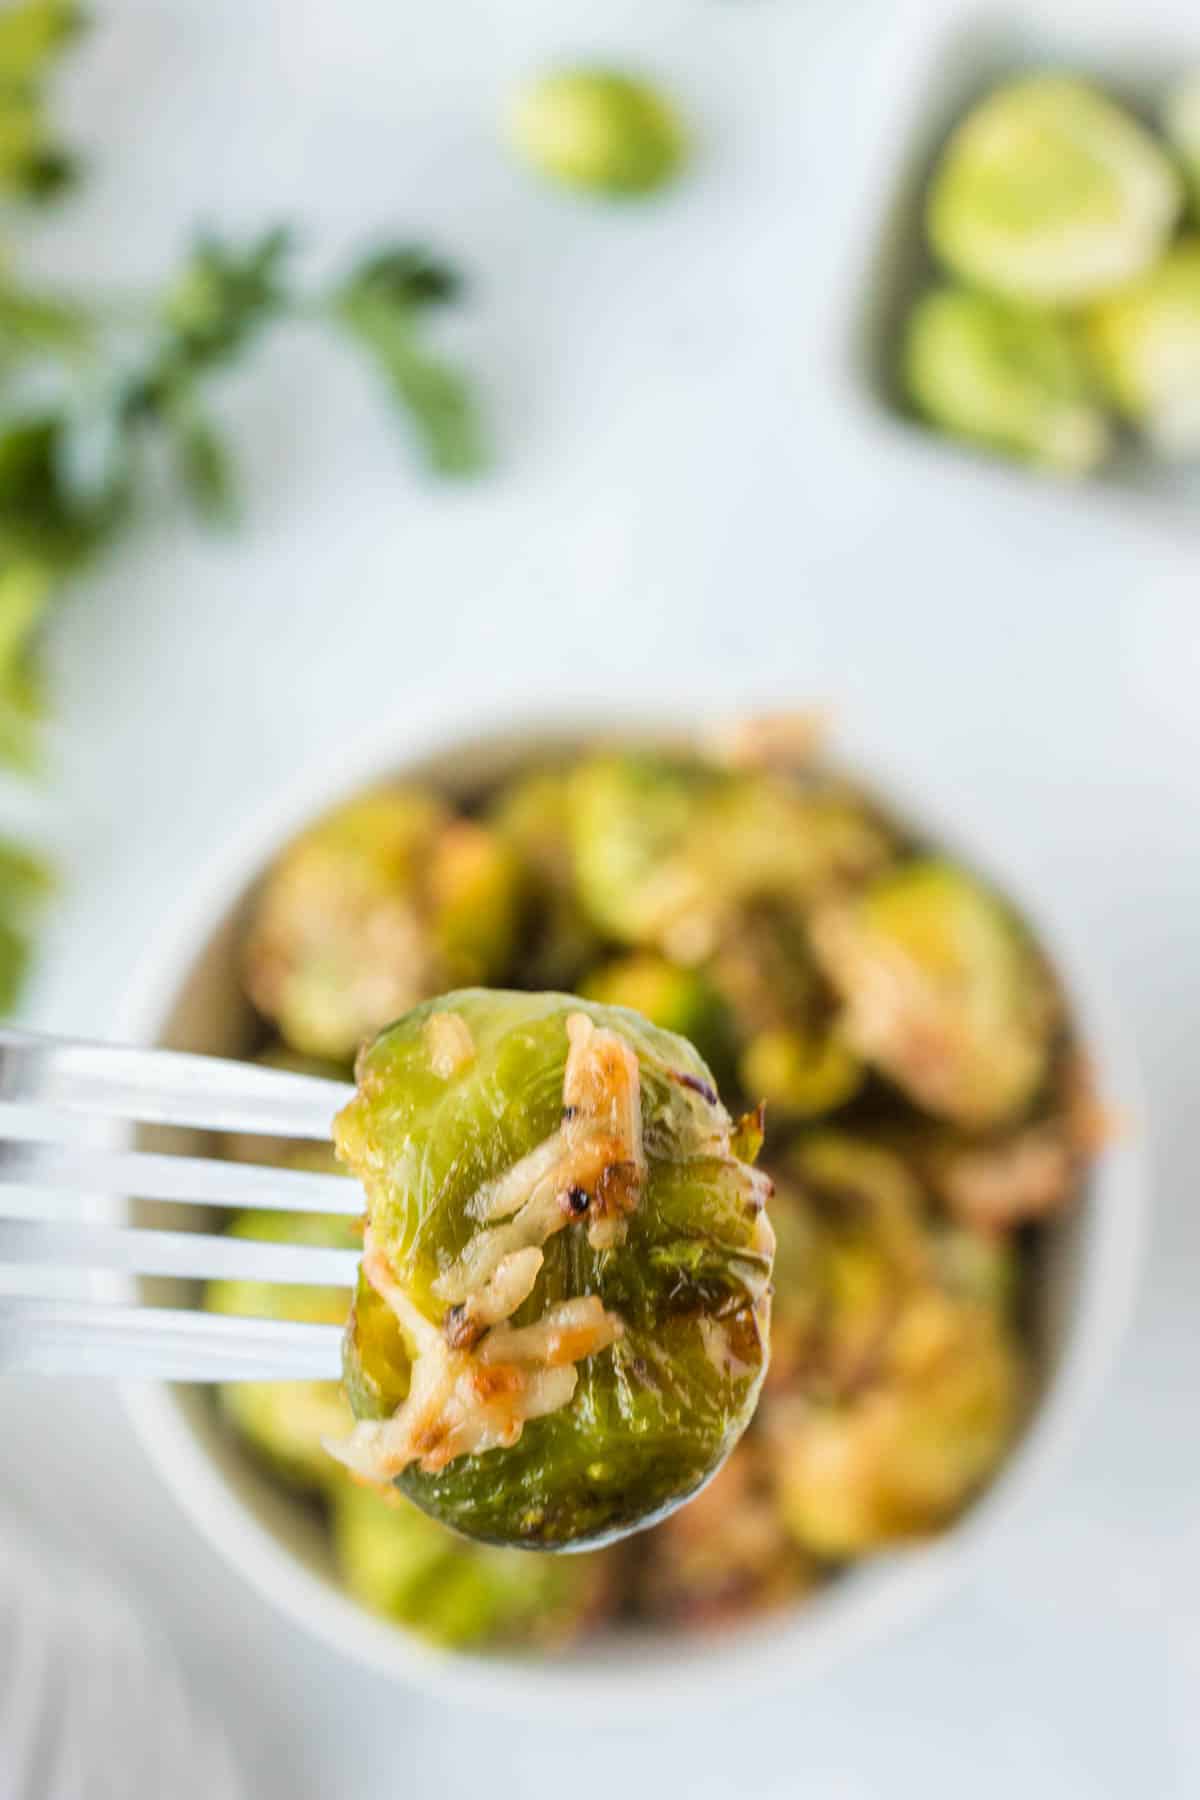 A fork holding a balsamic and parmesan seasoned brussels sprout.